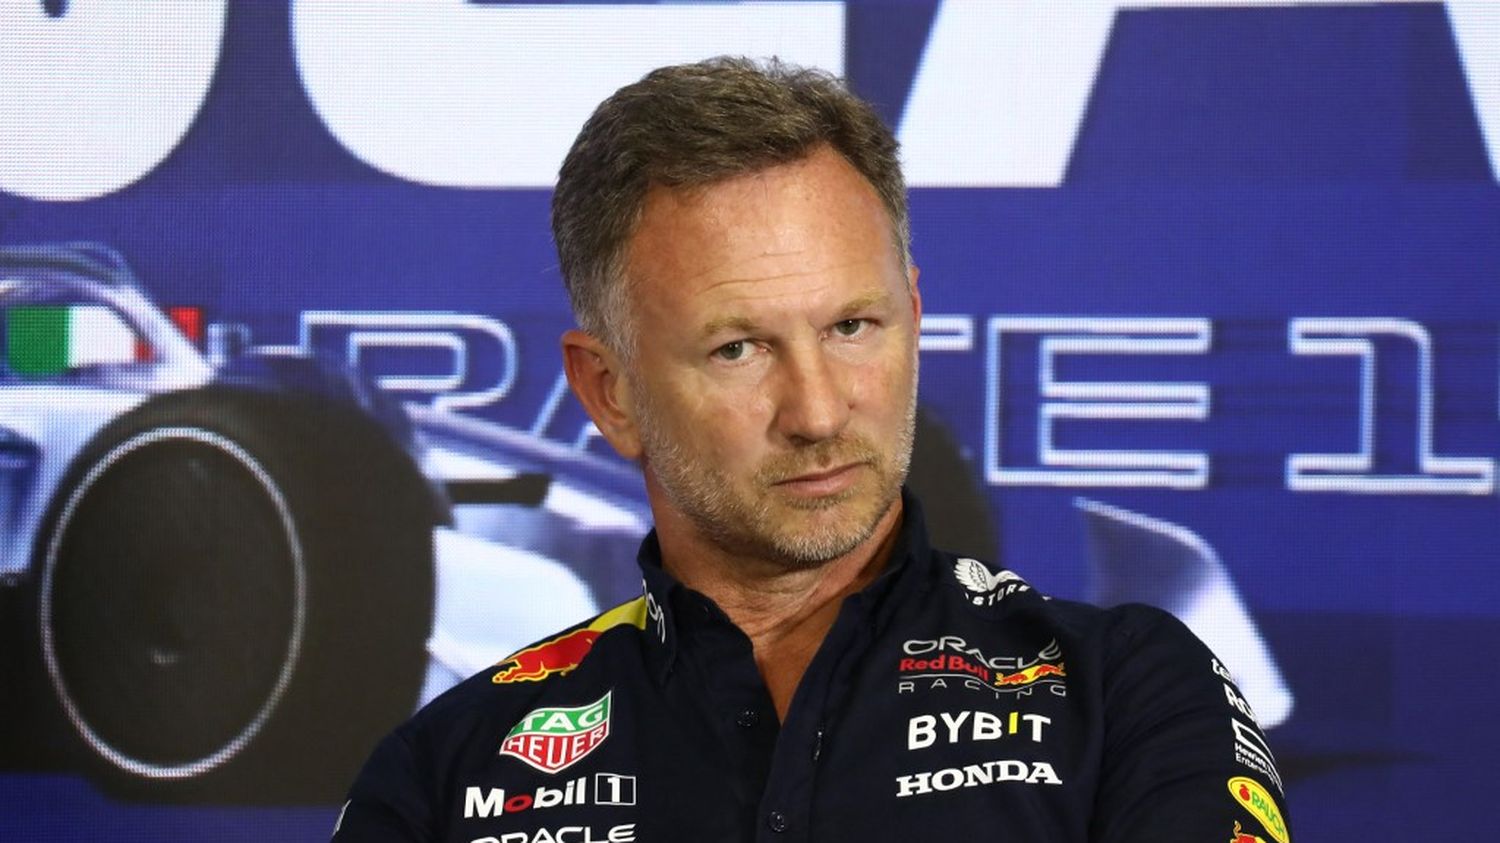 F1: Christian Horner, head of the Red Bull team, targeted by an internal investigation